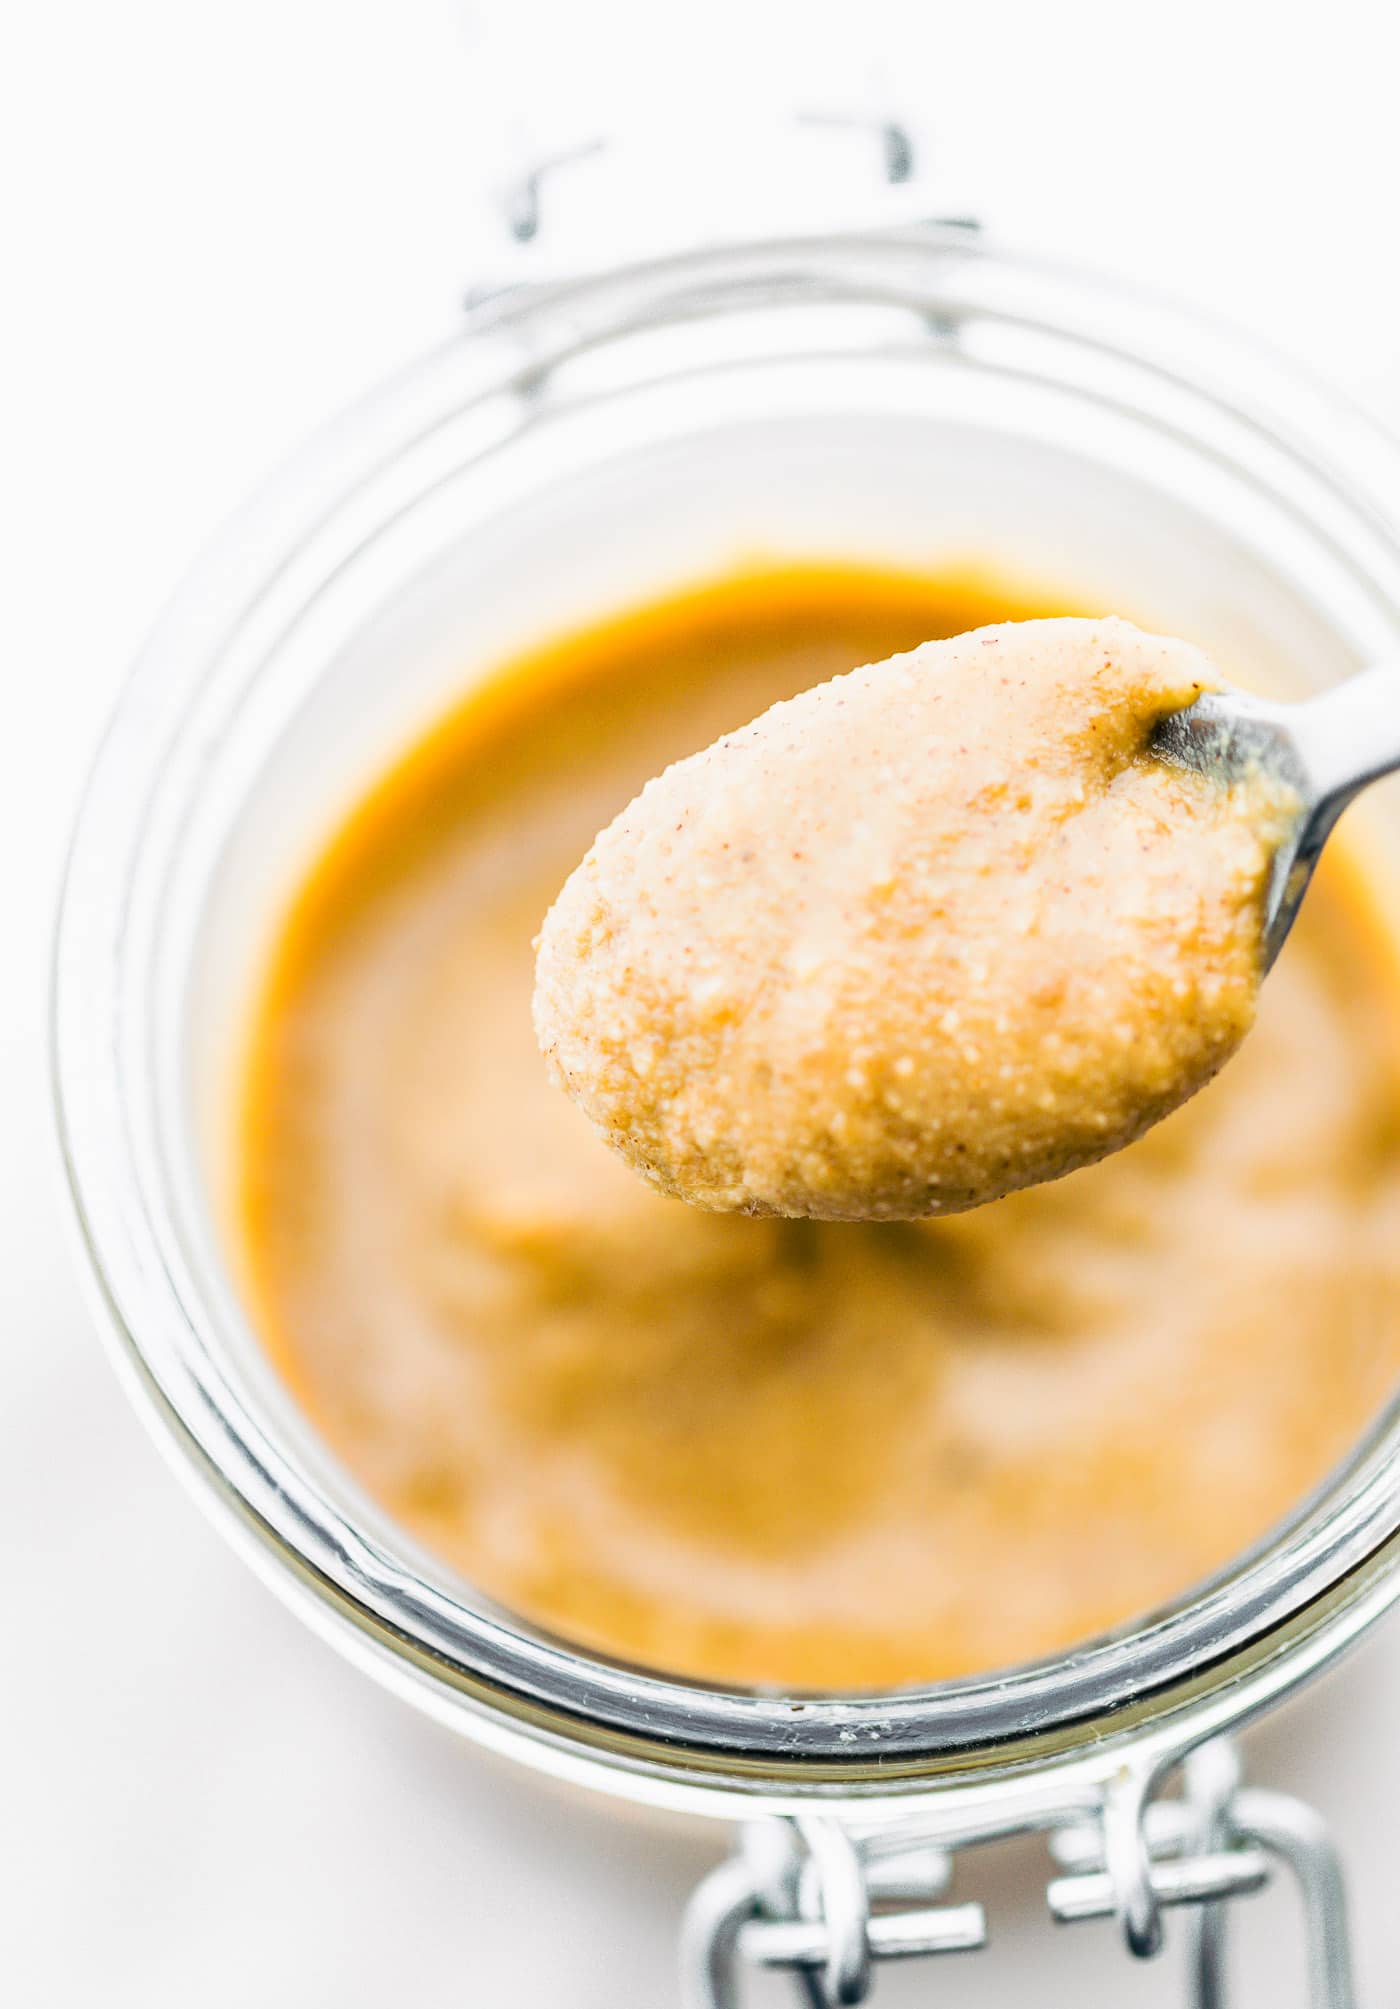 A spoonful of homemade cashew butter dipped into a jar of nut butter.